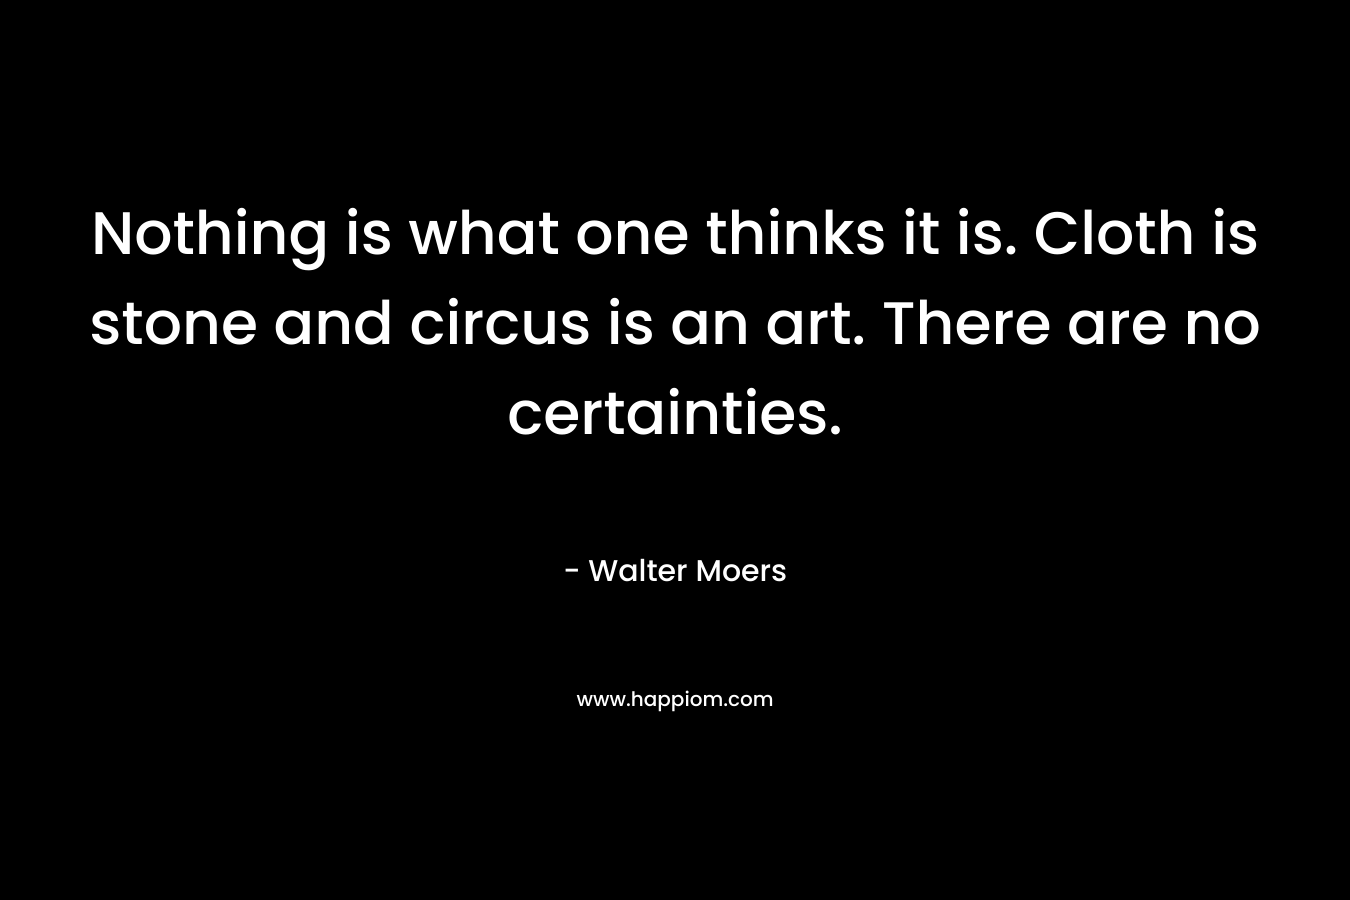 Nothing is what one thinks it is. Cloth is stone and circus is an art. There are no certainties. – Walter Moers